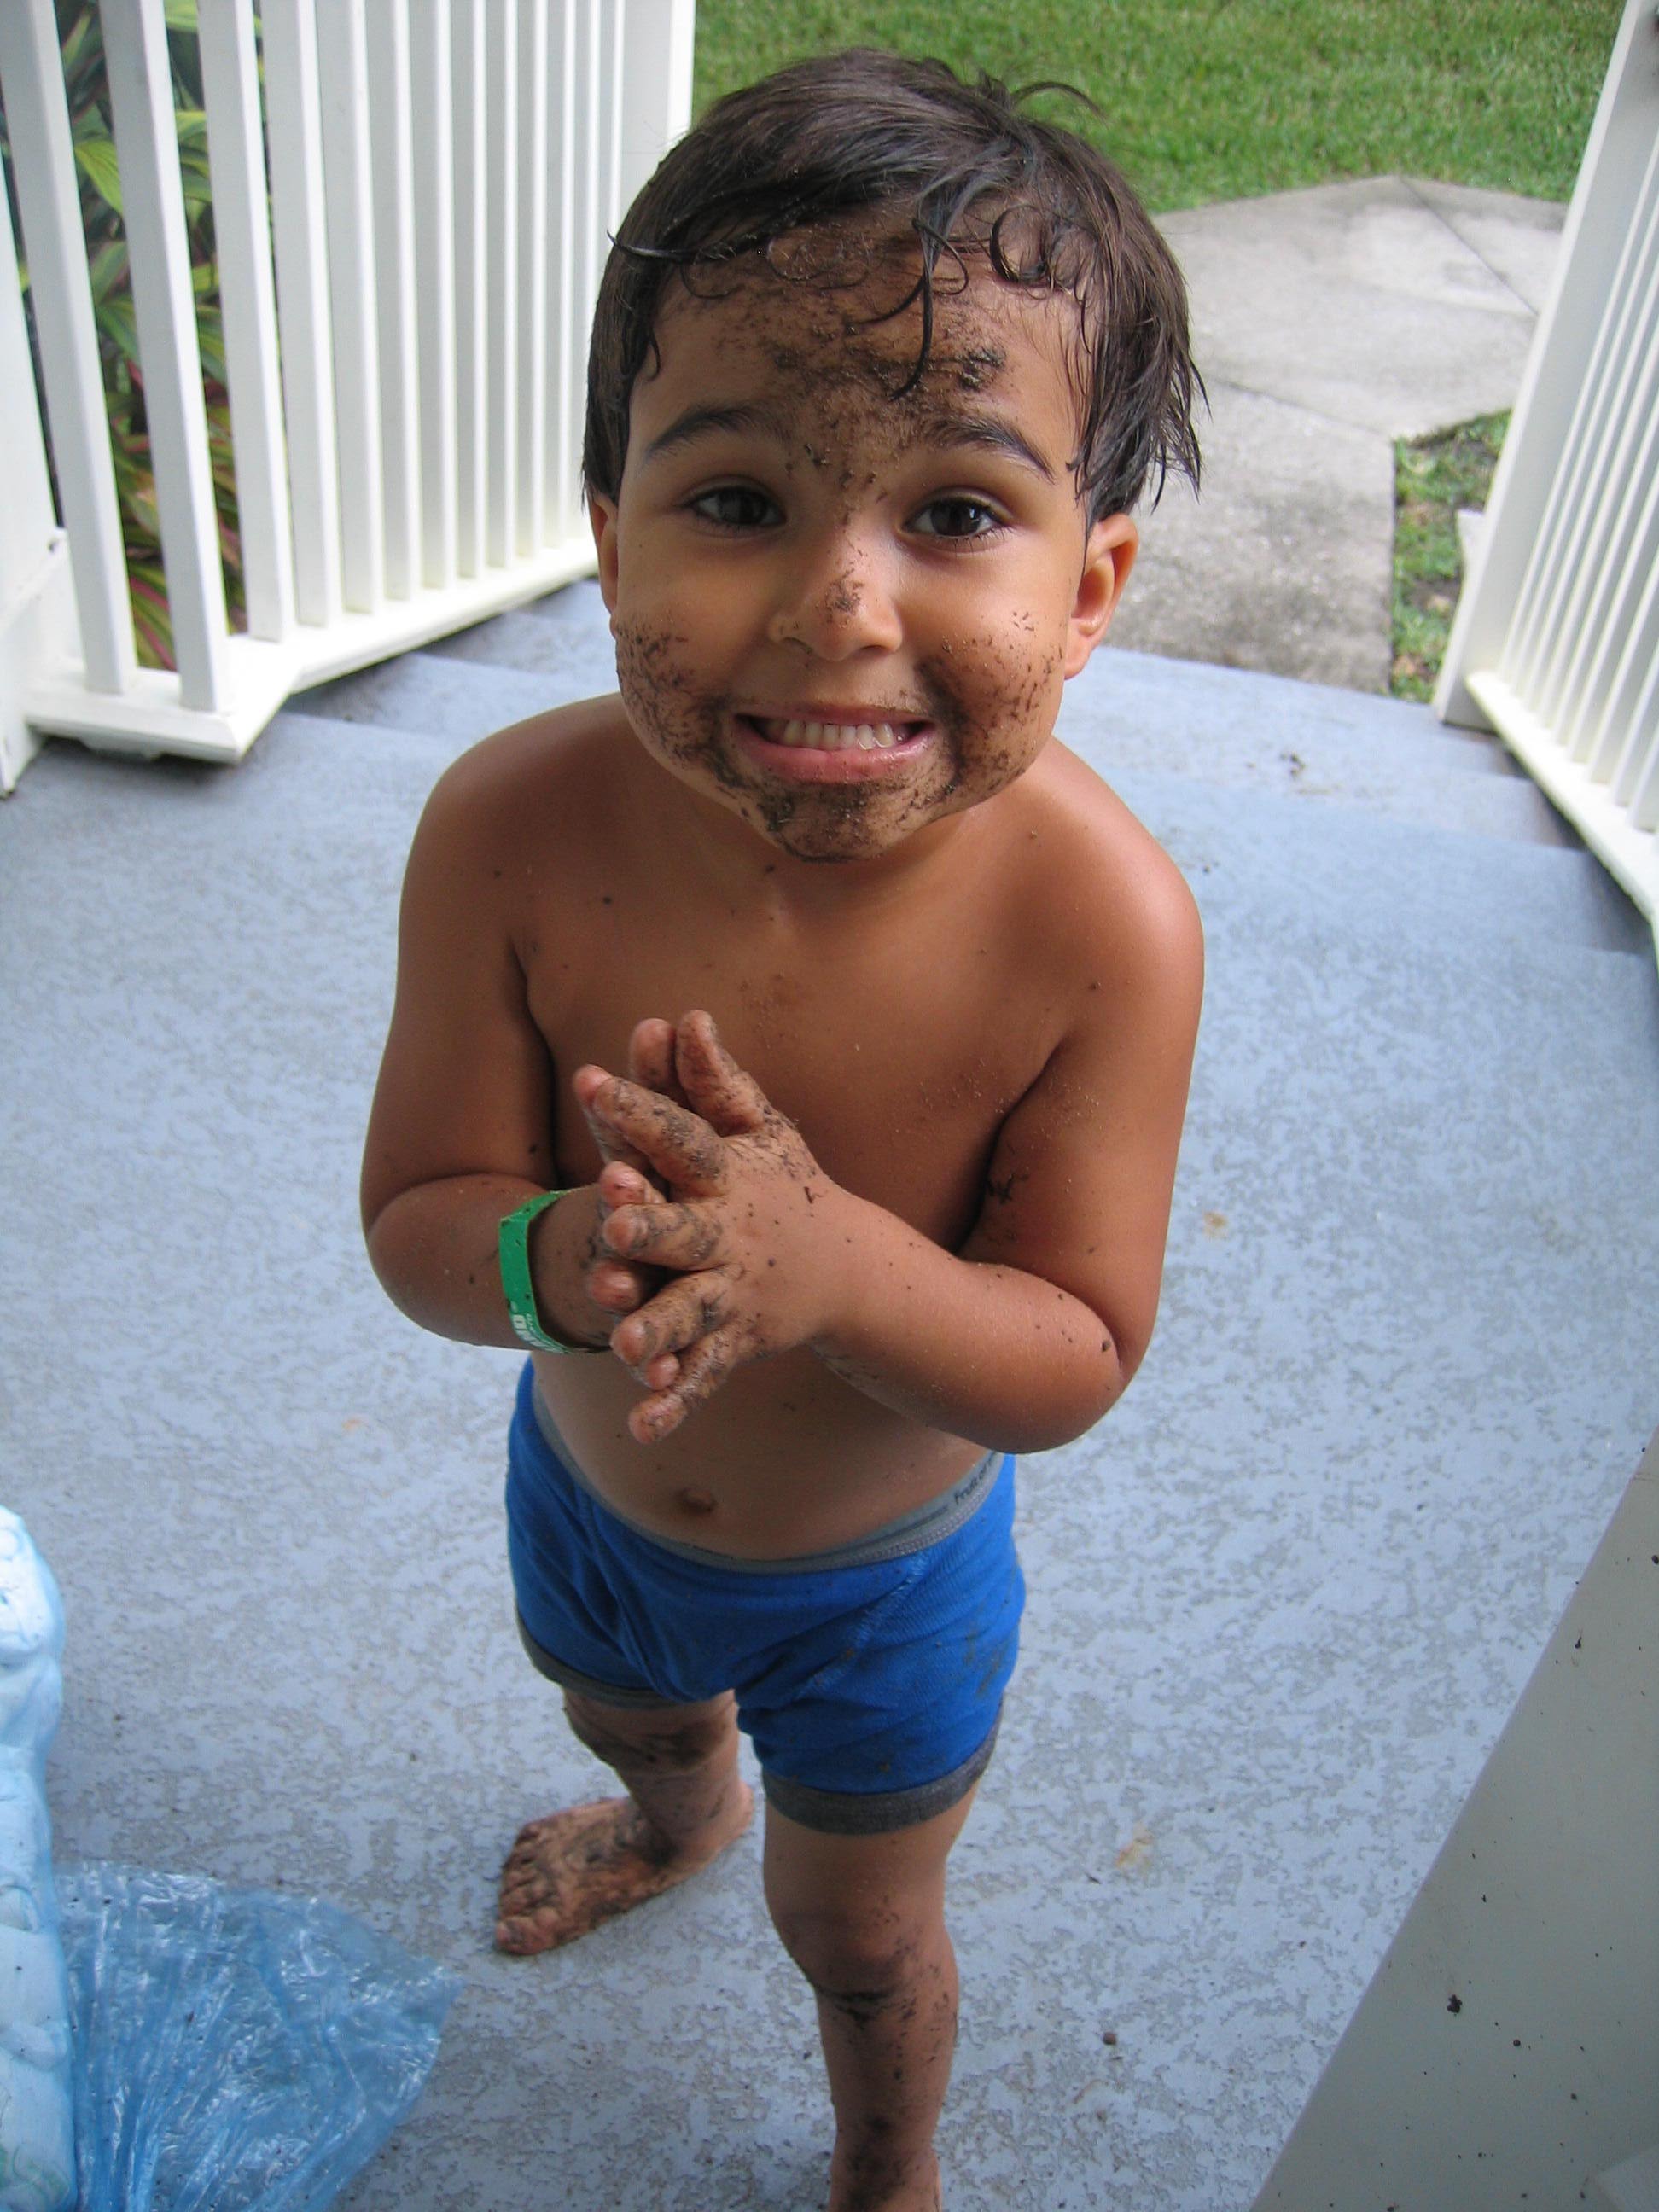 "No, Mommy...I didn't touch the mud. Yes, I'm sure."